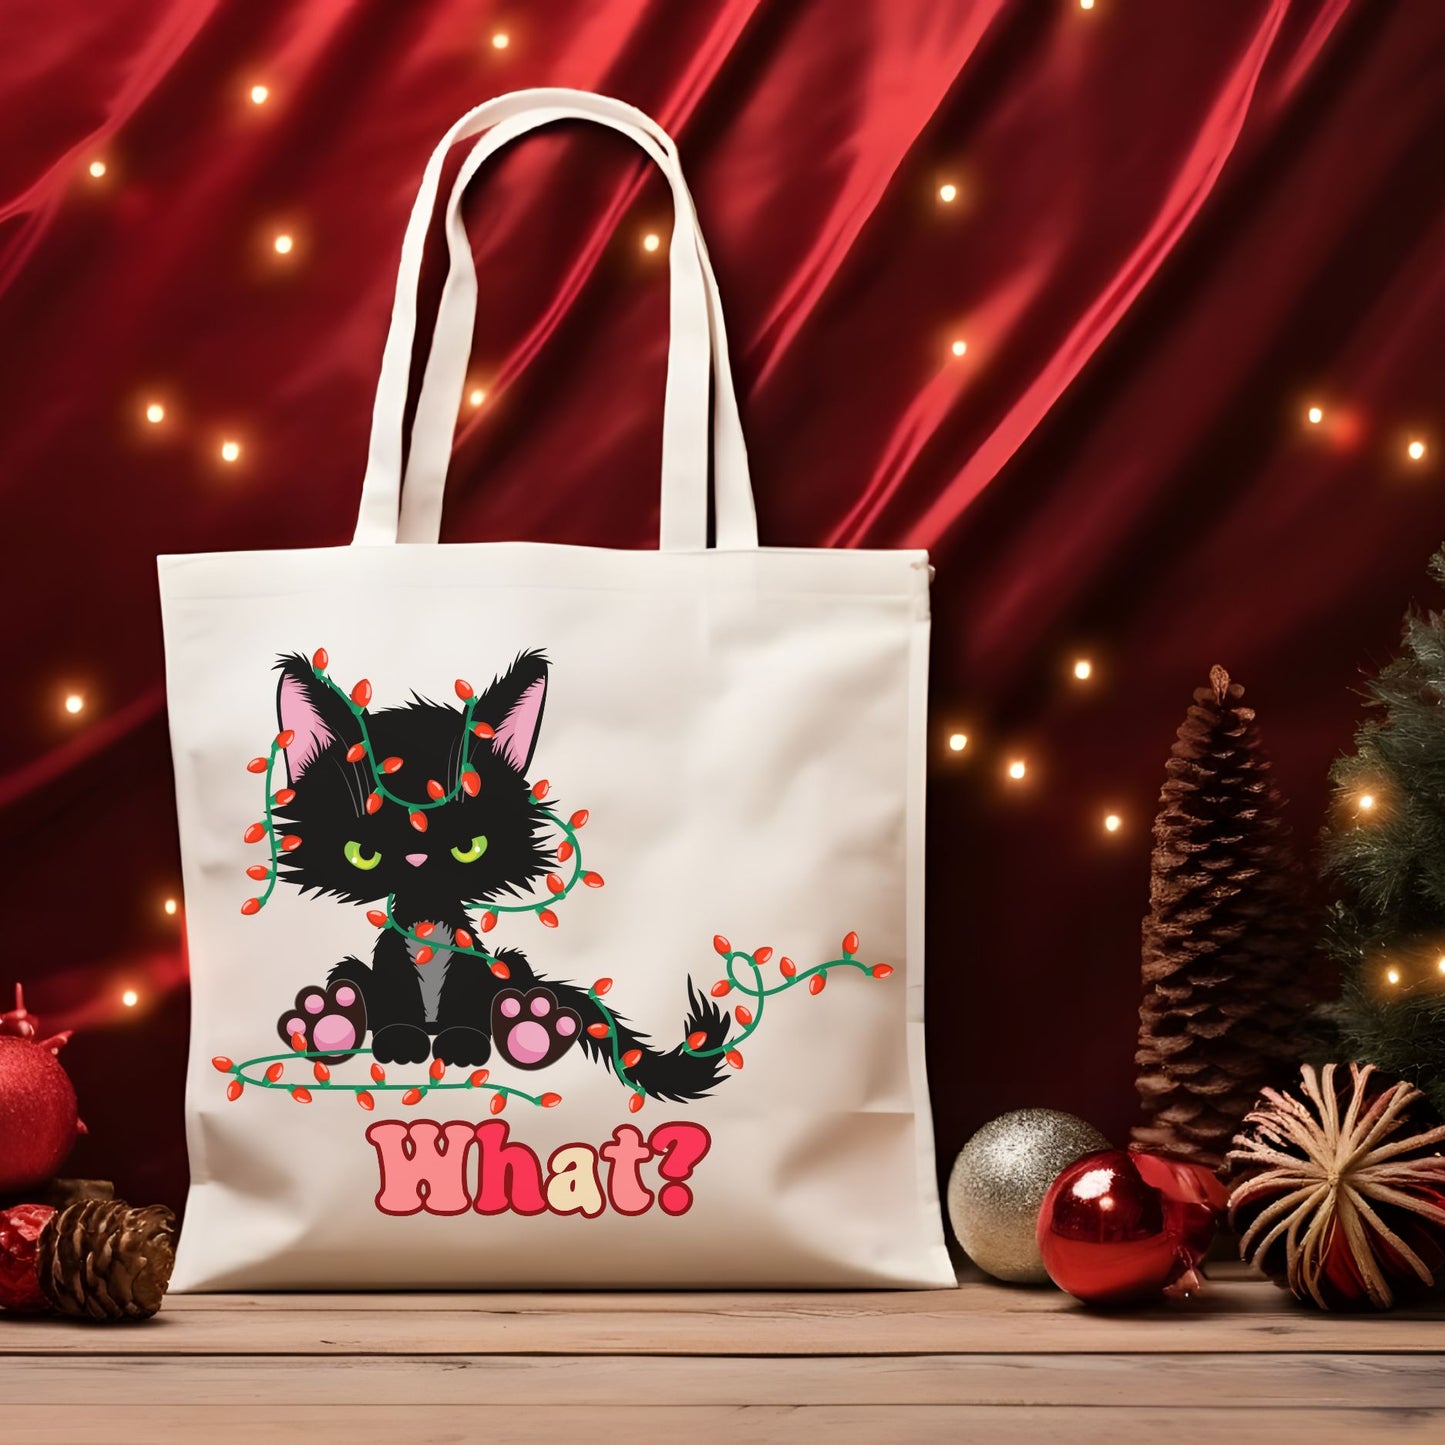 What Black Cat Tote Bag - Funny Black Cat Totes with Christmas Lights, Perfect Christmas Bags Accessories   